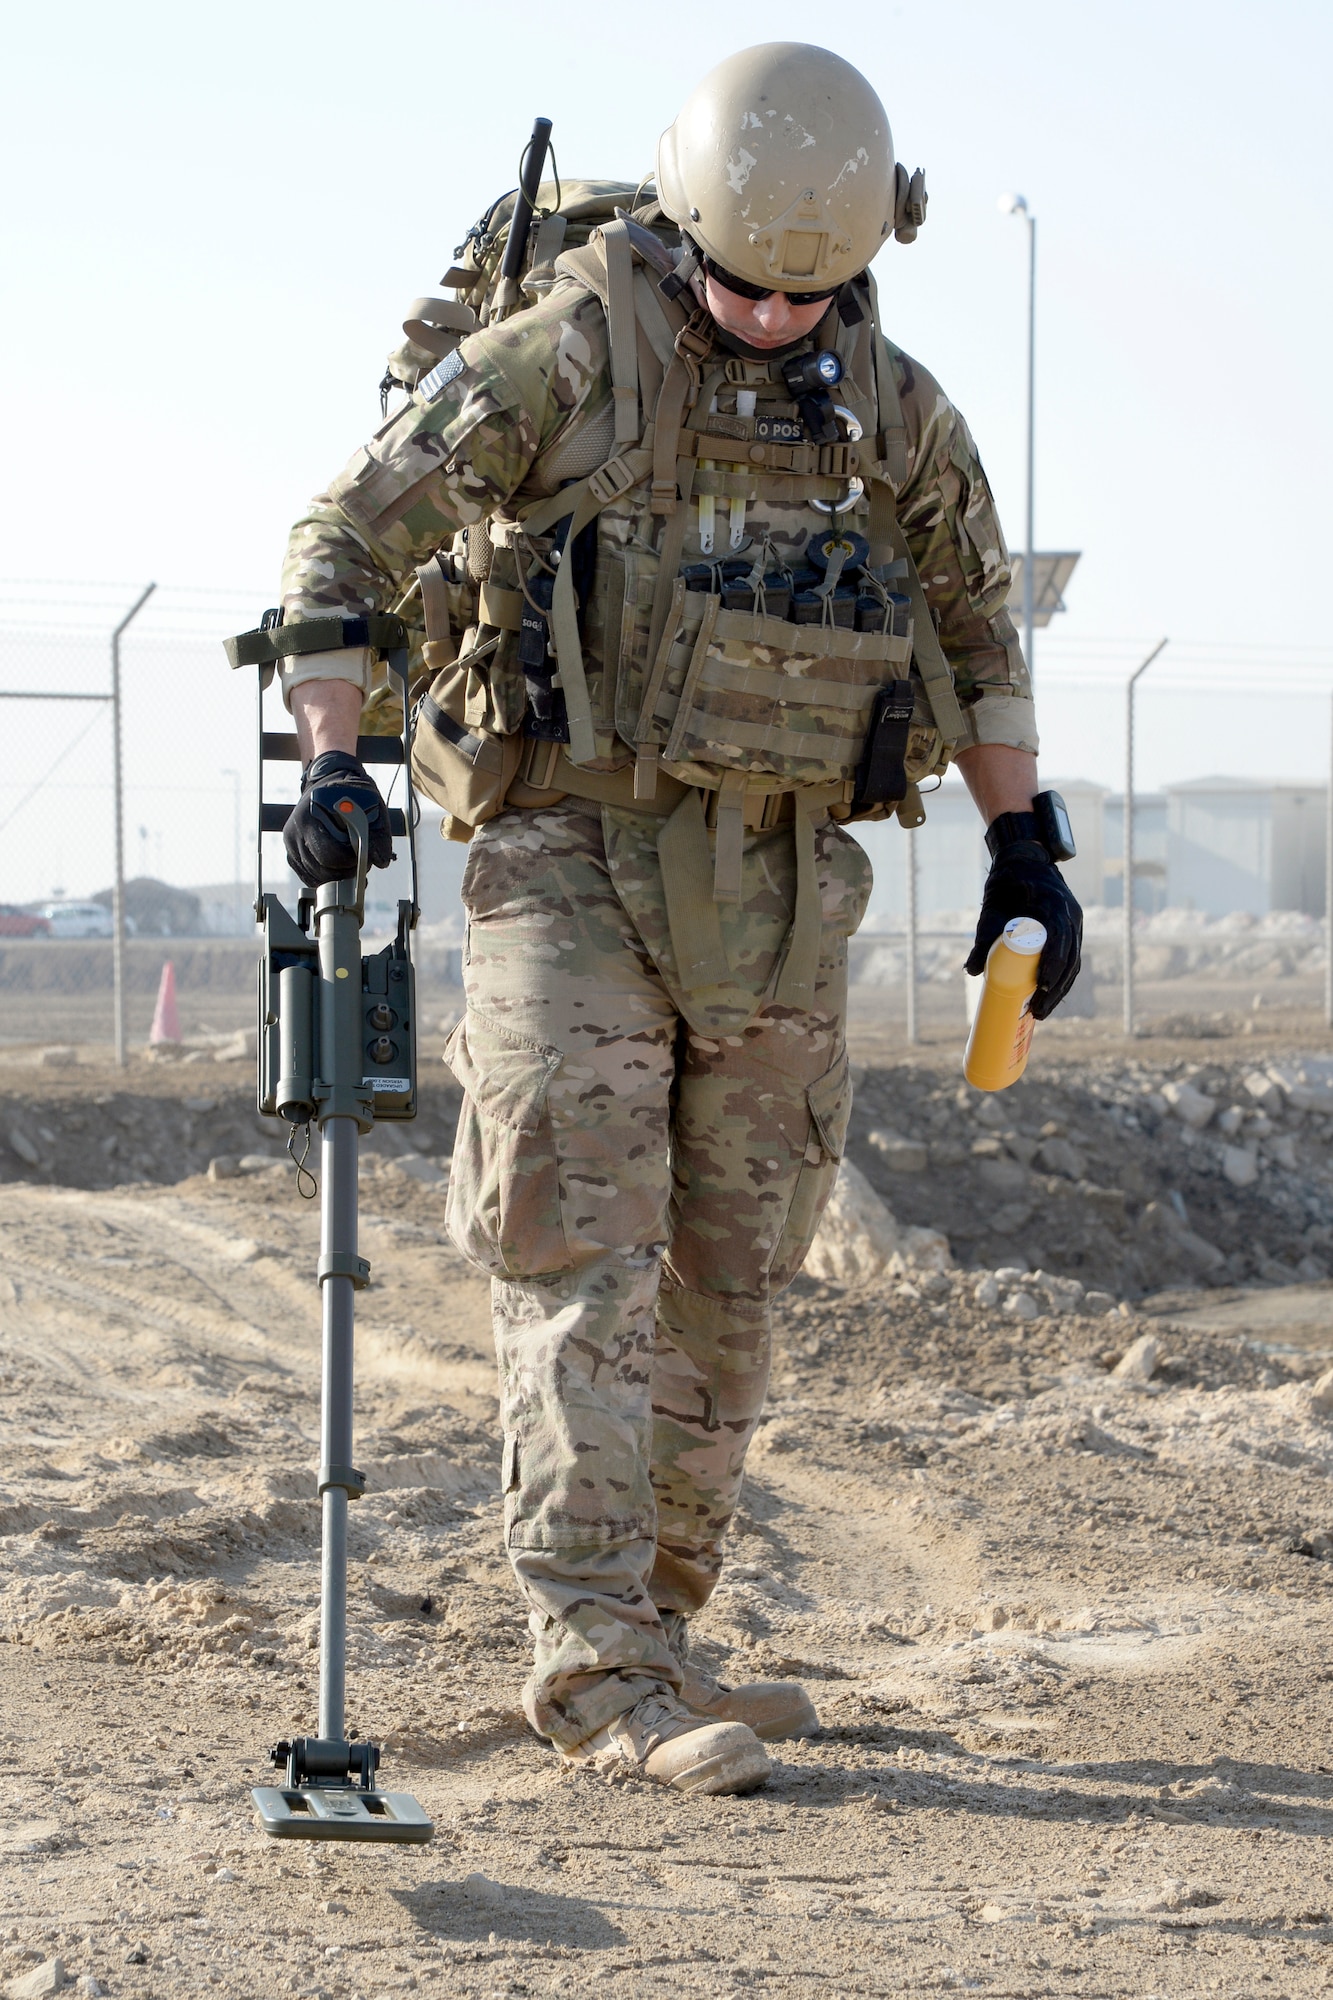 Staff Sgt. Ace, an explosive ordnance disposal technician, uses a metal detector to scan the area for a simulated improvised explosive device during a training exercise Dec. 30, 2014, in Southwest Asia. EOD Airmen are tasked with clearing munitions and enabling base operations to resume, such as clearing the airfield and creating an airstrip to get aircraft back in the air in order to provide defense. (U.S. Air Force photo/Tech. Sgt. Marie Brown)